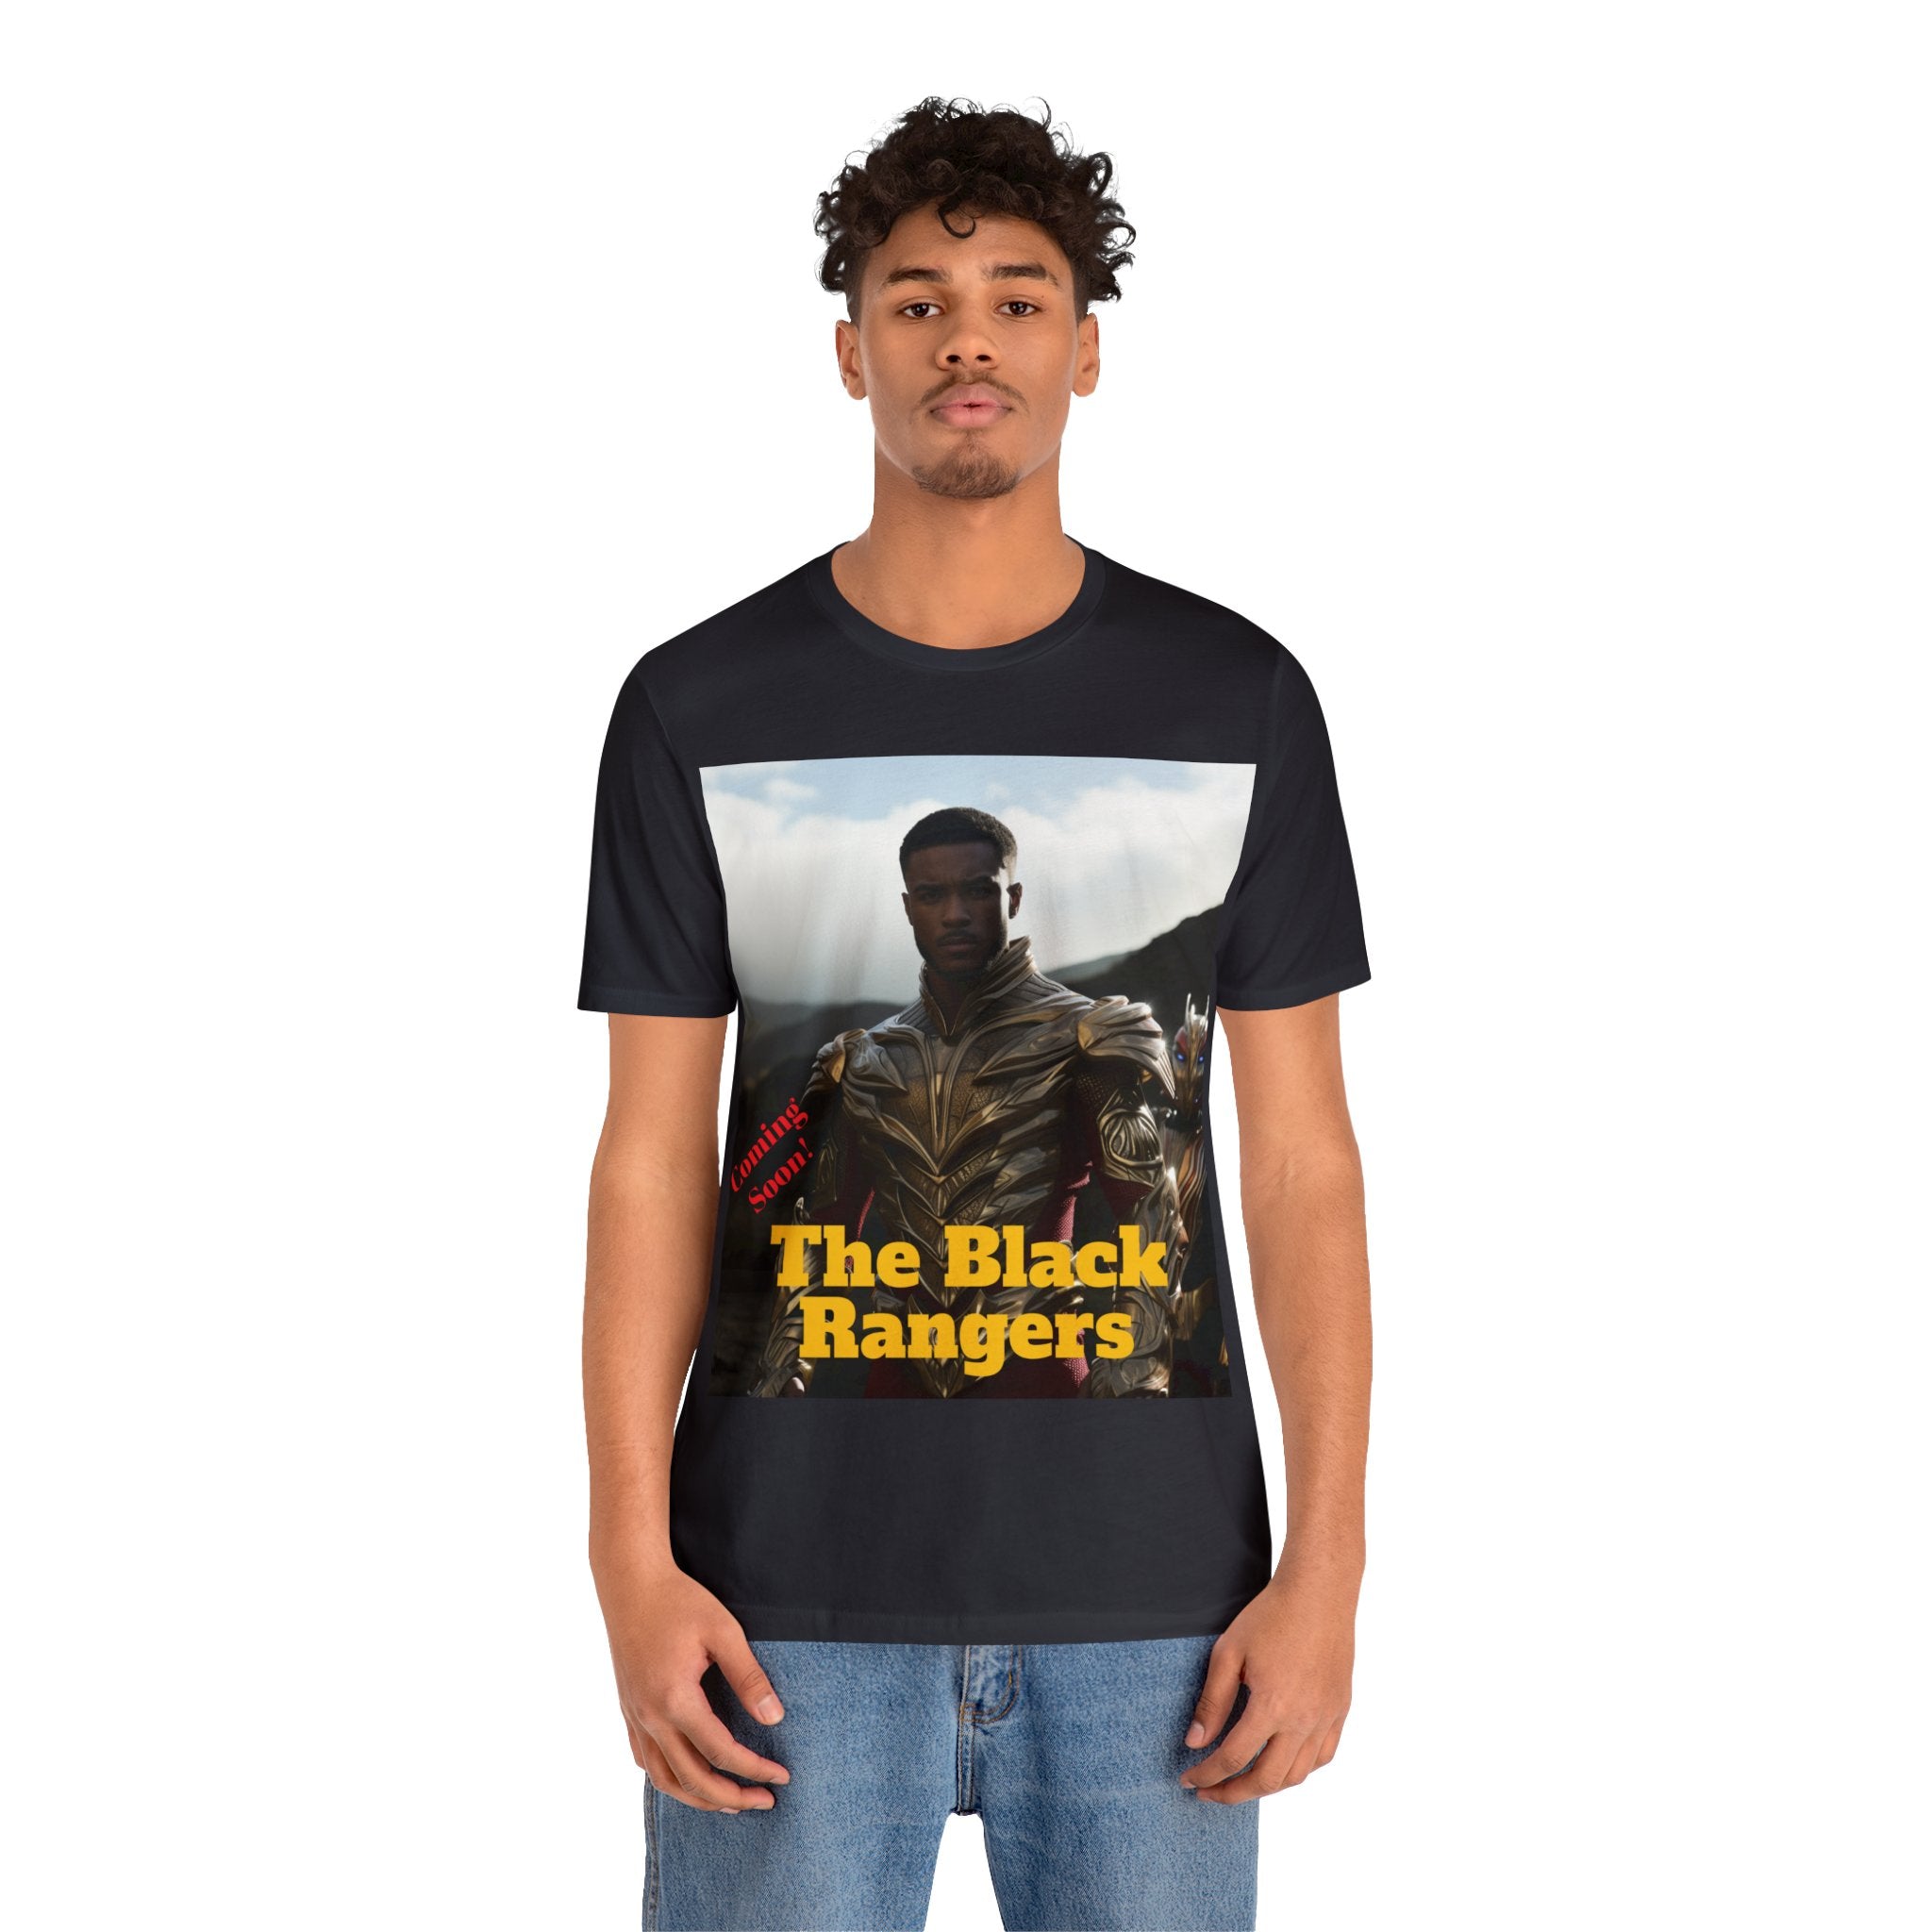 🎁 The Perfect Gift for Power Rangers Fans and Advocates of Diversity: Looking for a unique gift that combines the thrill of Power Rangers with a powerful message of Afro-American excellence? This jersey short sleeve tee is an excellent choice for birthdays, special events, or as a meaningful gift to inspire and empower.